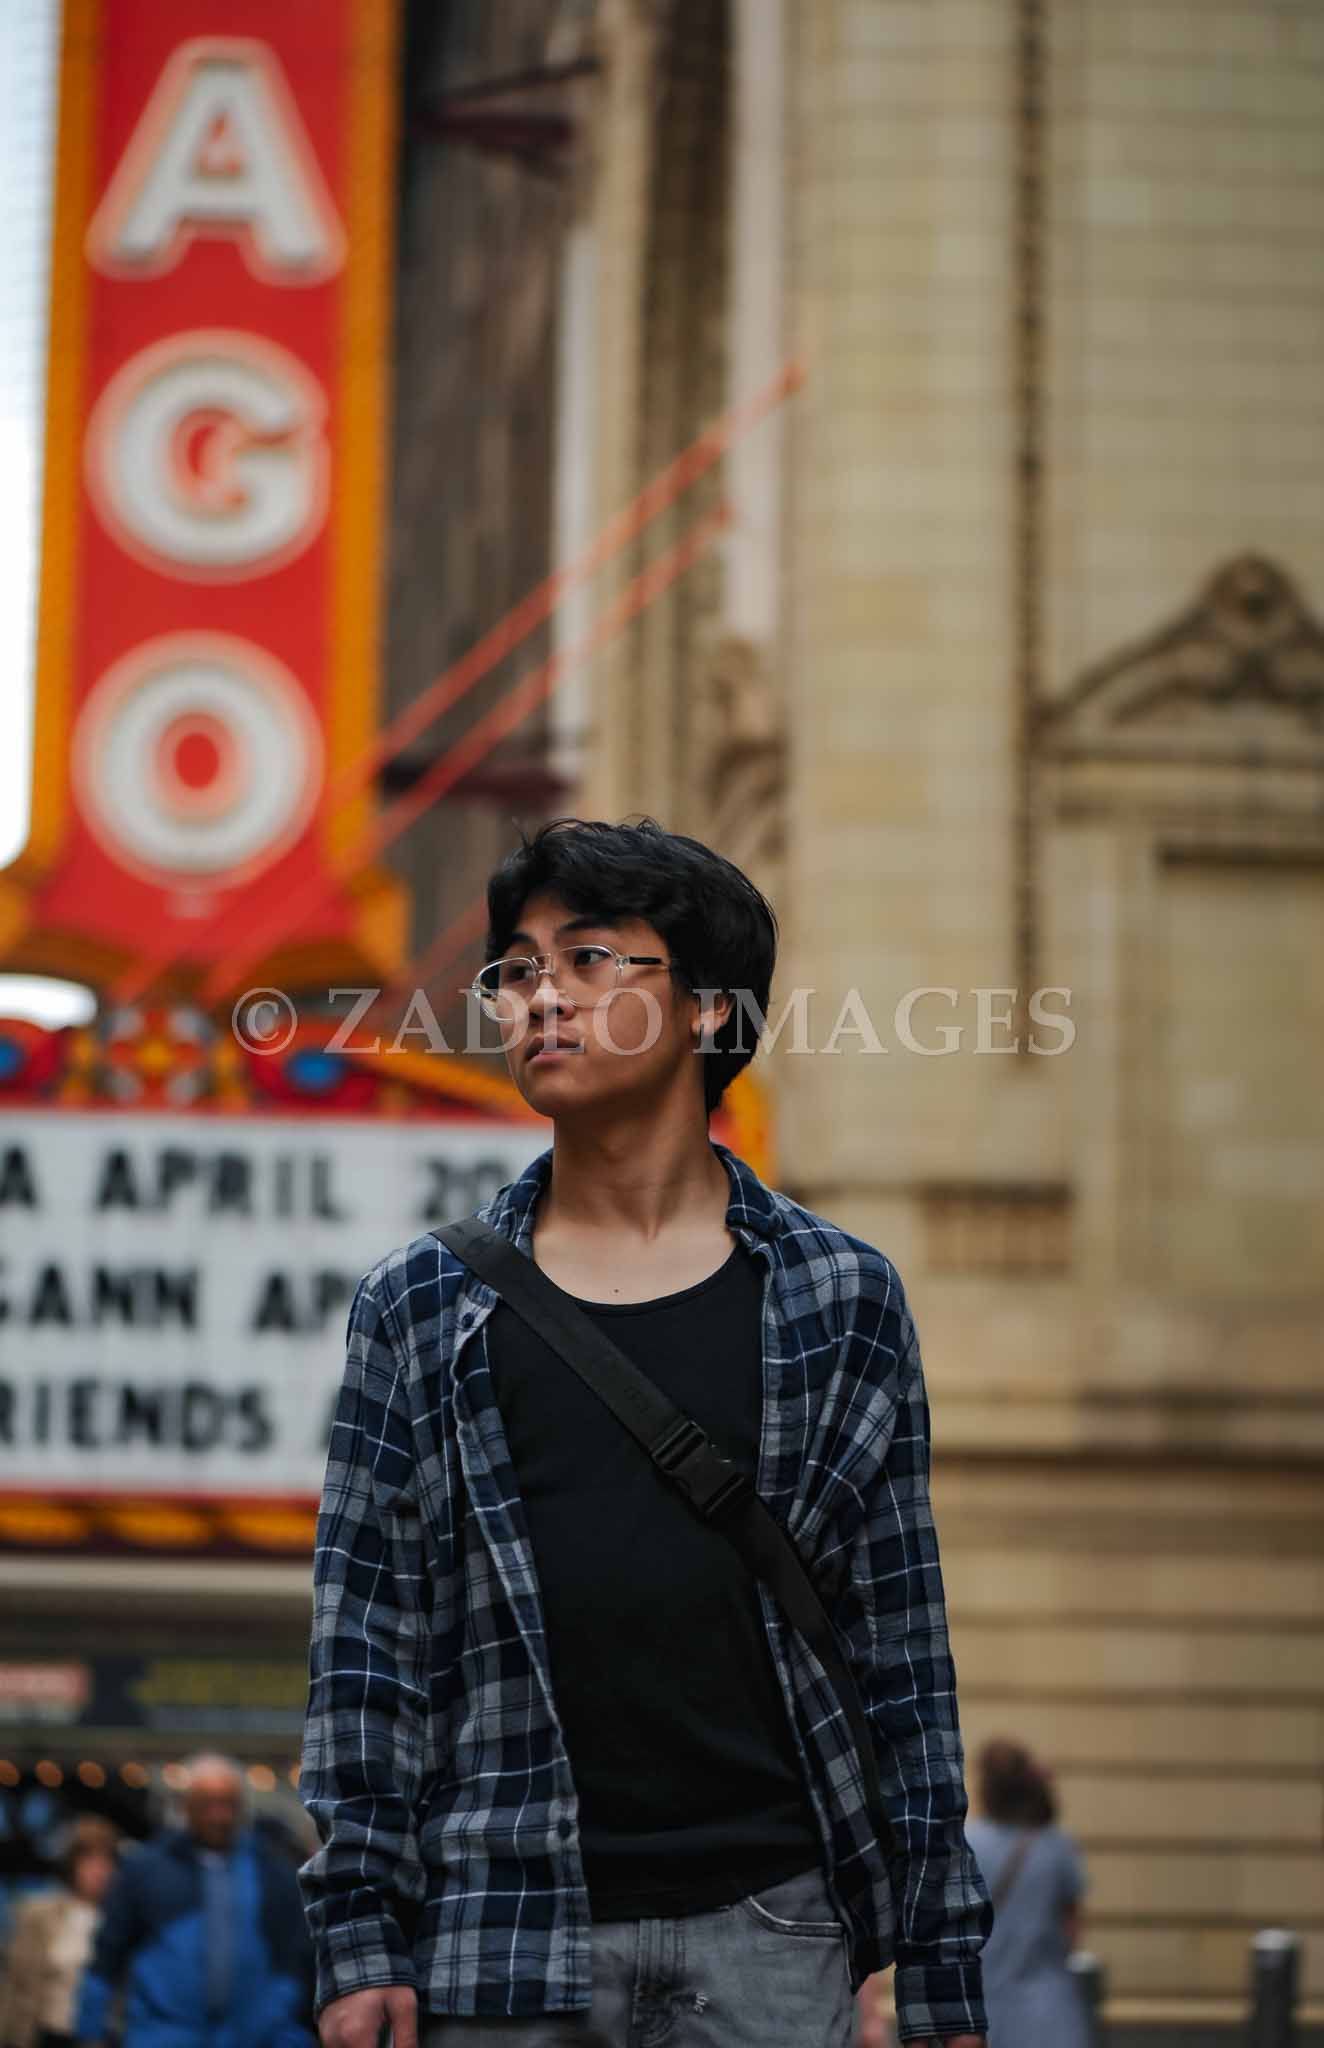 Person standing in front of chicago sign.